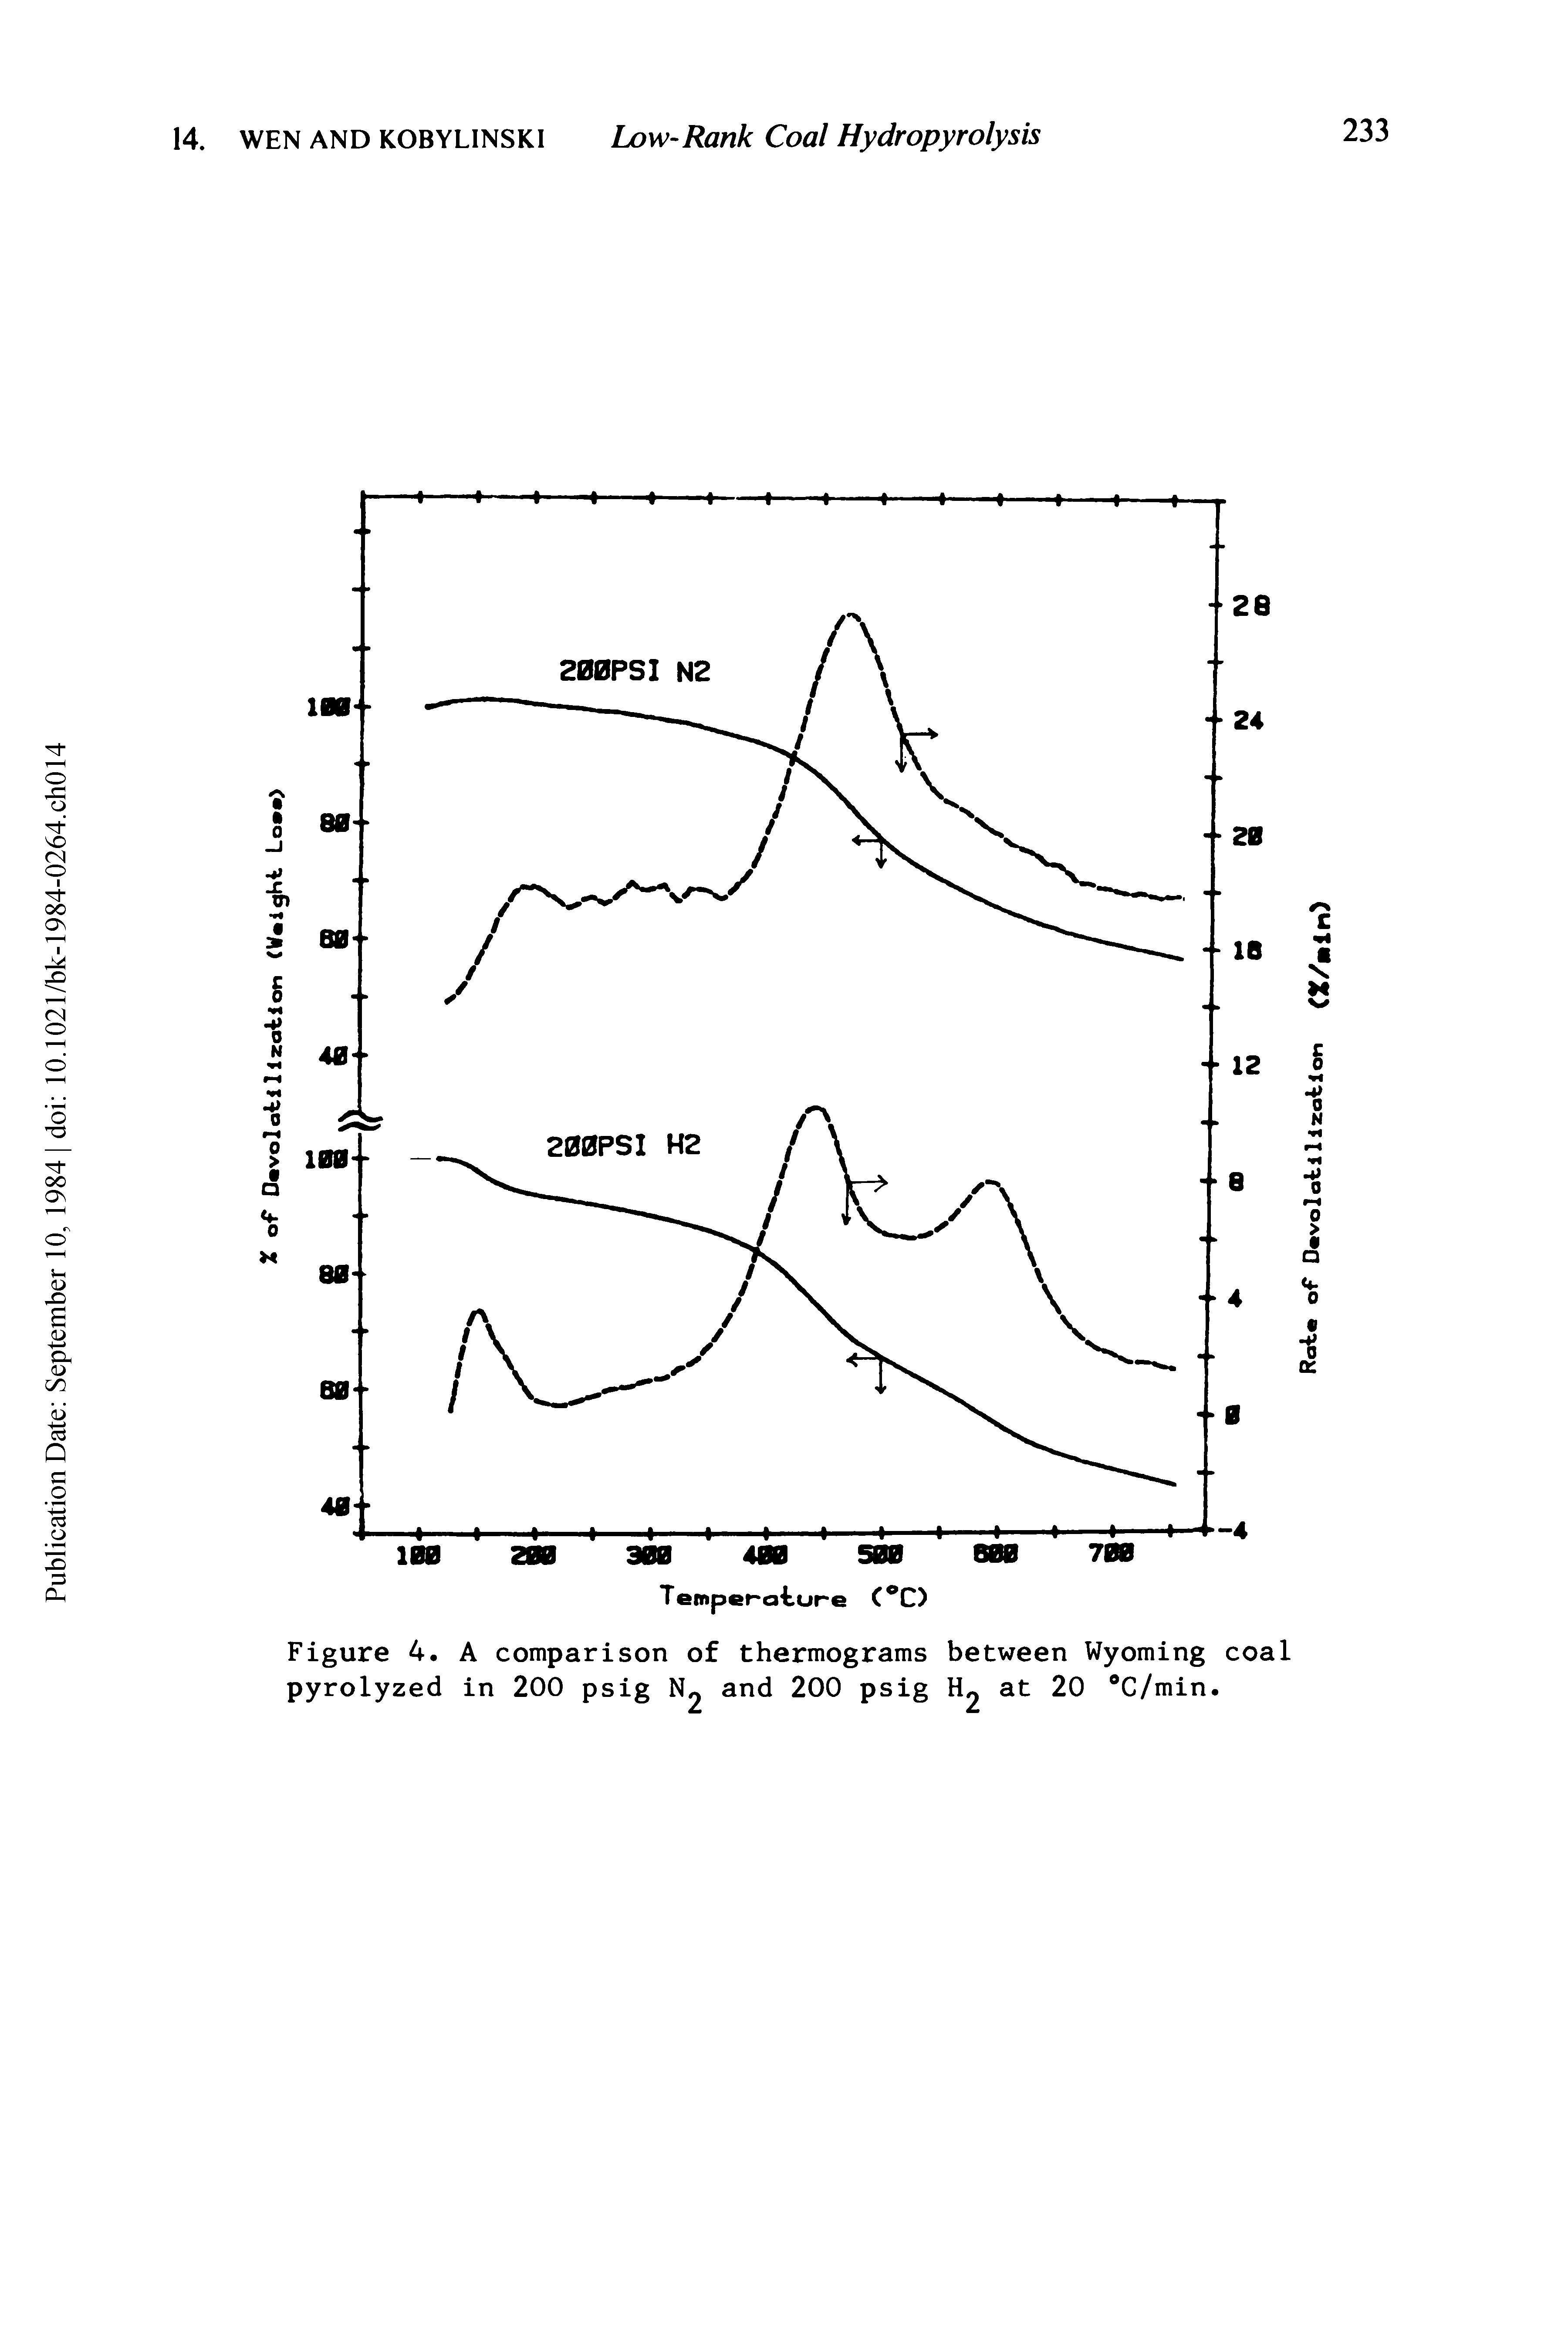 Figure 4. A comparison of thermograms between Wyoming coal pyrolyzed in 200 psig N2 and 200 psig H2 at 20 C/min.